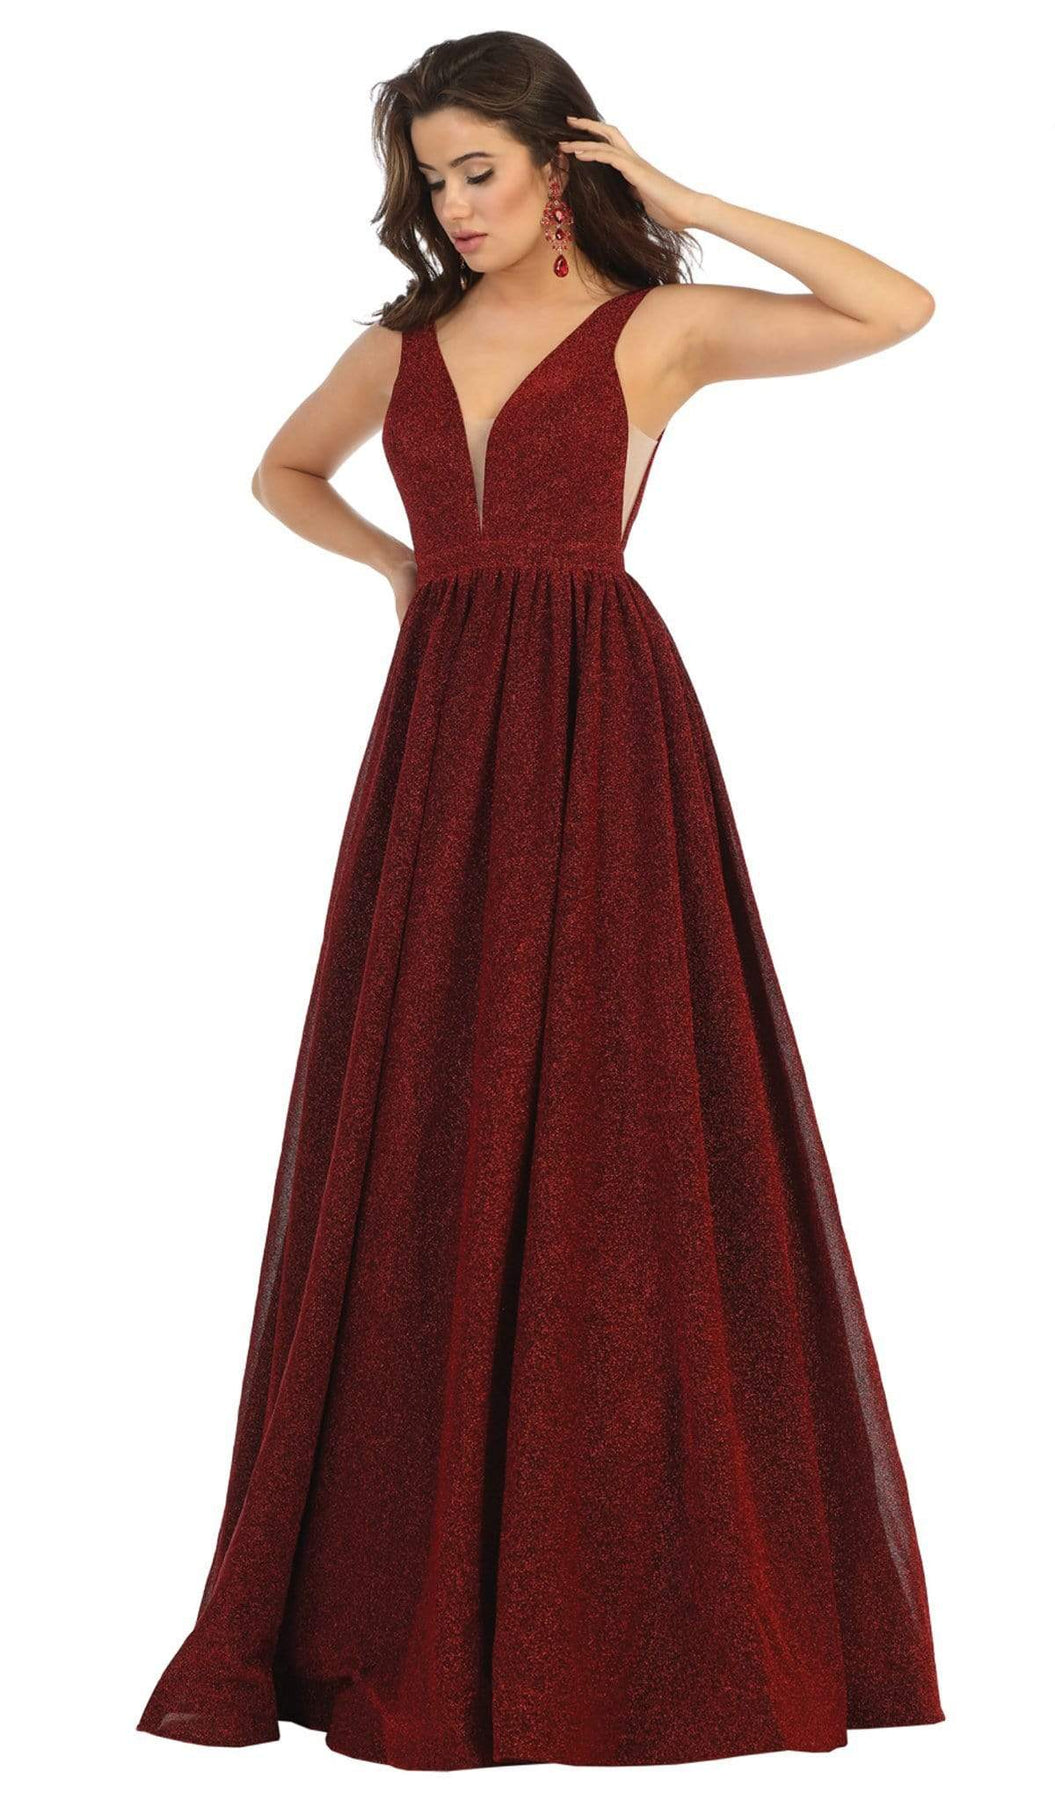 May Queen - RQ7753 Sleeveless Deep V-neck A-line Dress Special Occasion Dress 4 / Burgundy